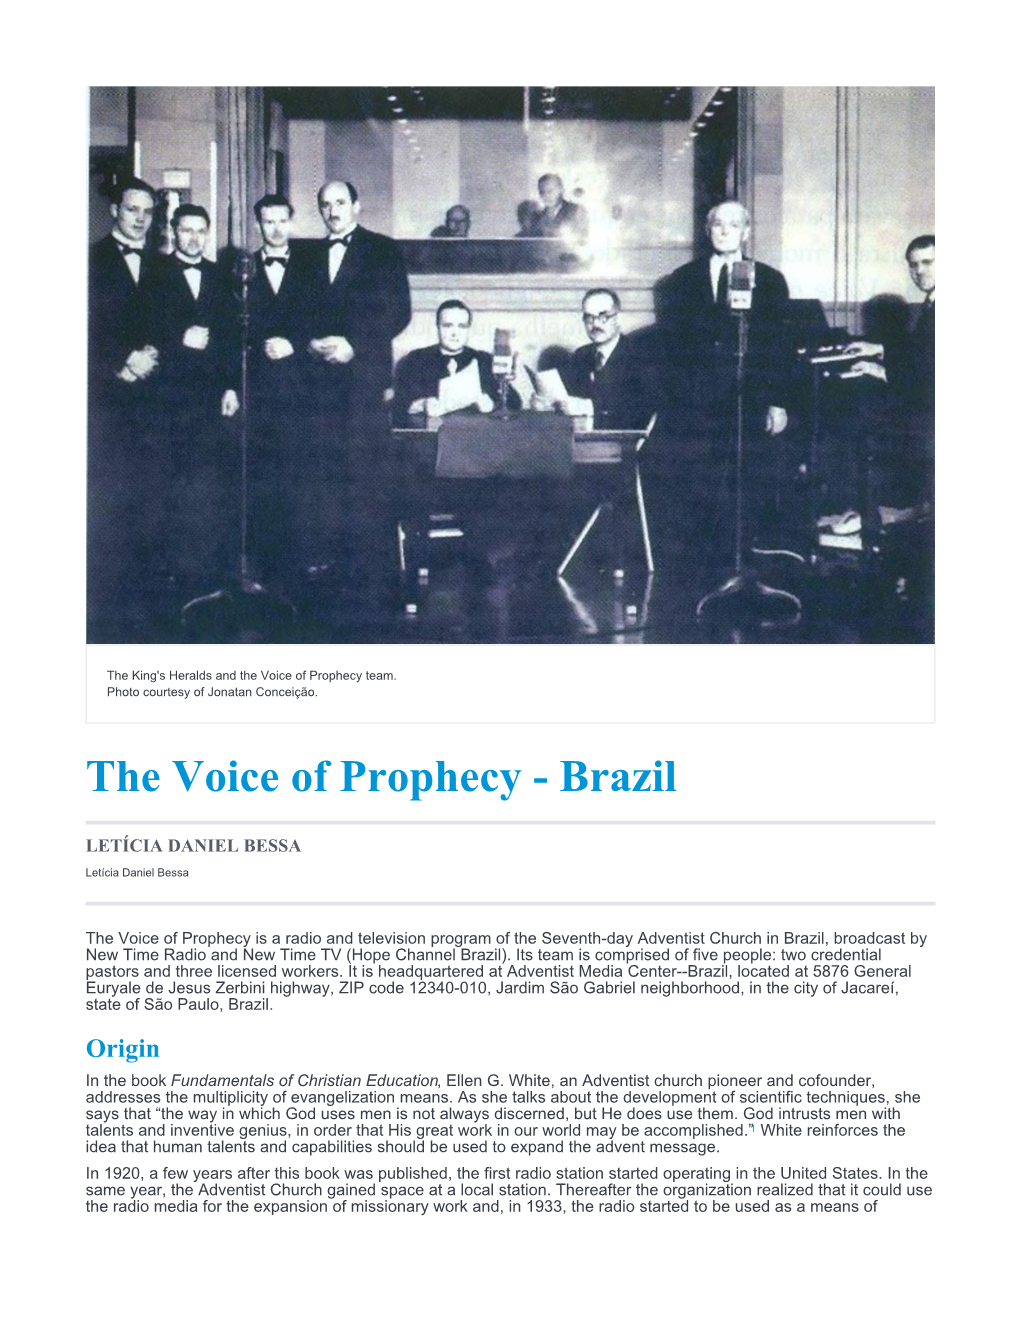 The Voice of Prophecy Team